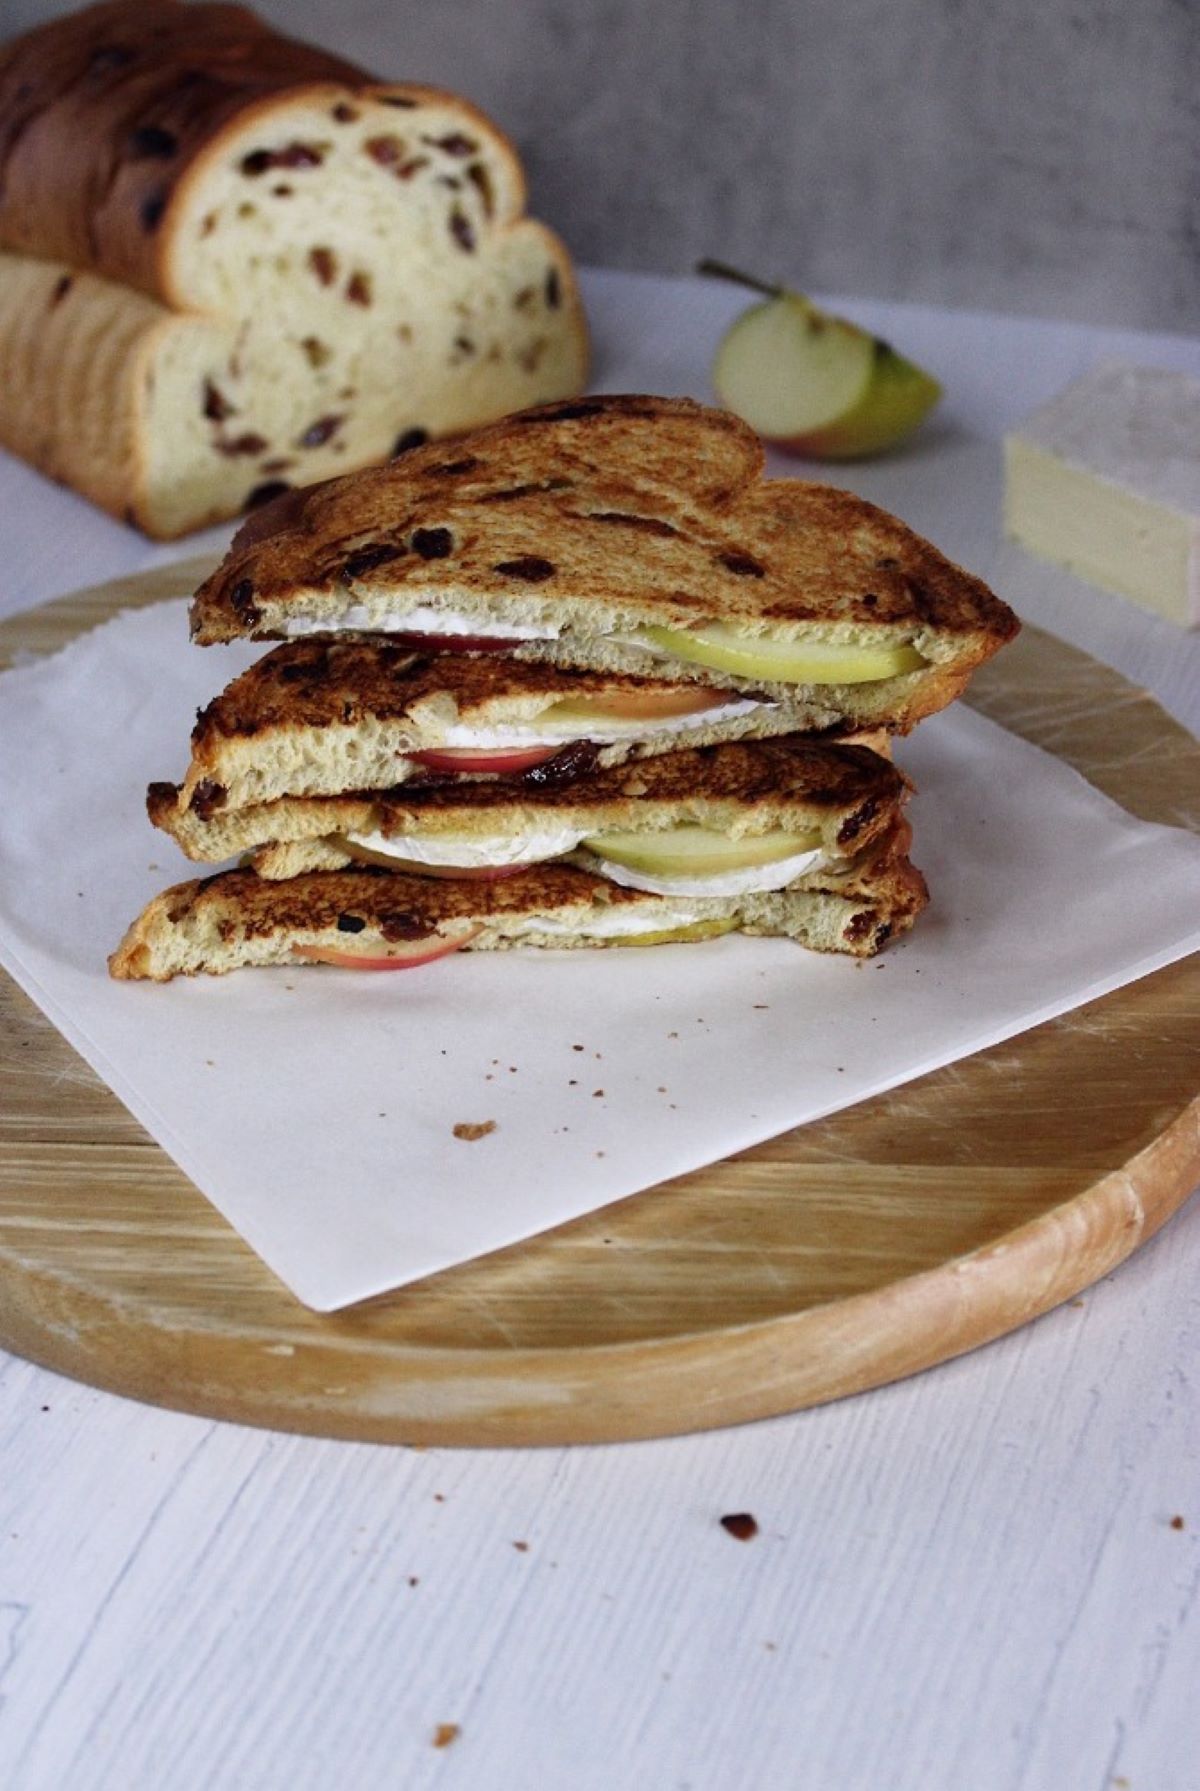 Grilled Brie Sandwich with Apple